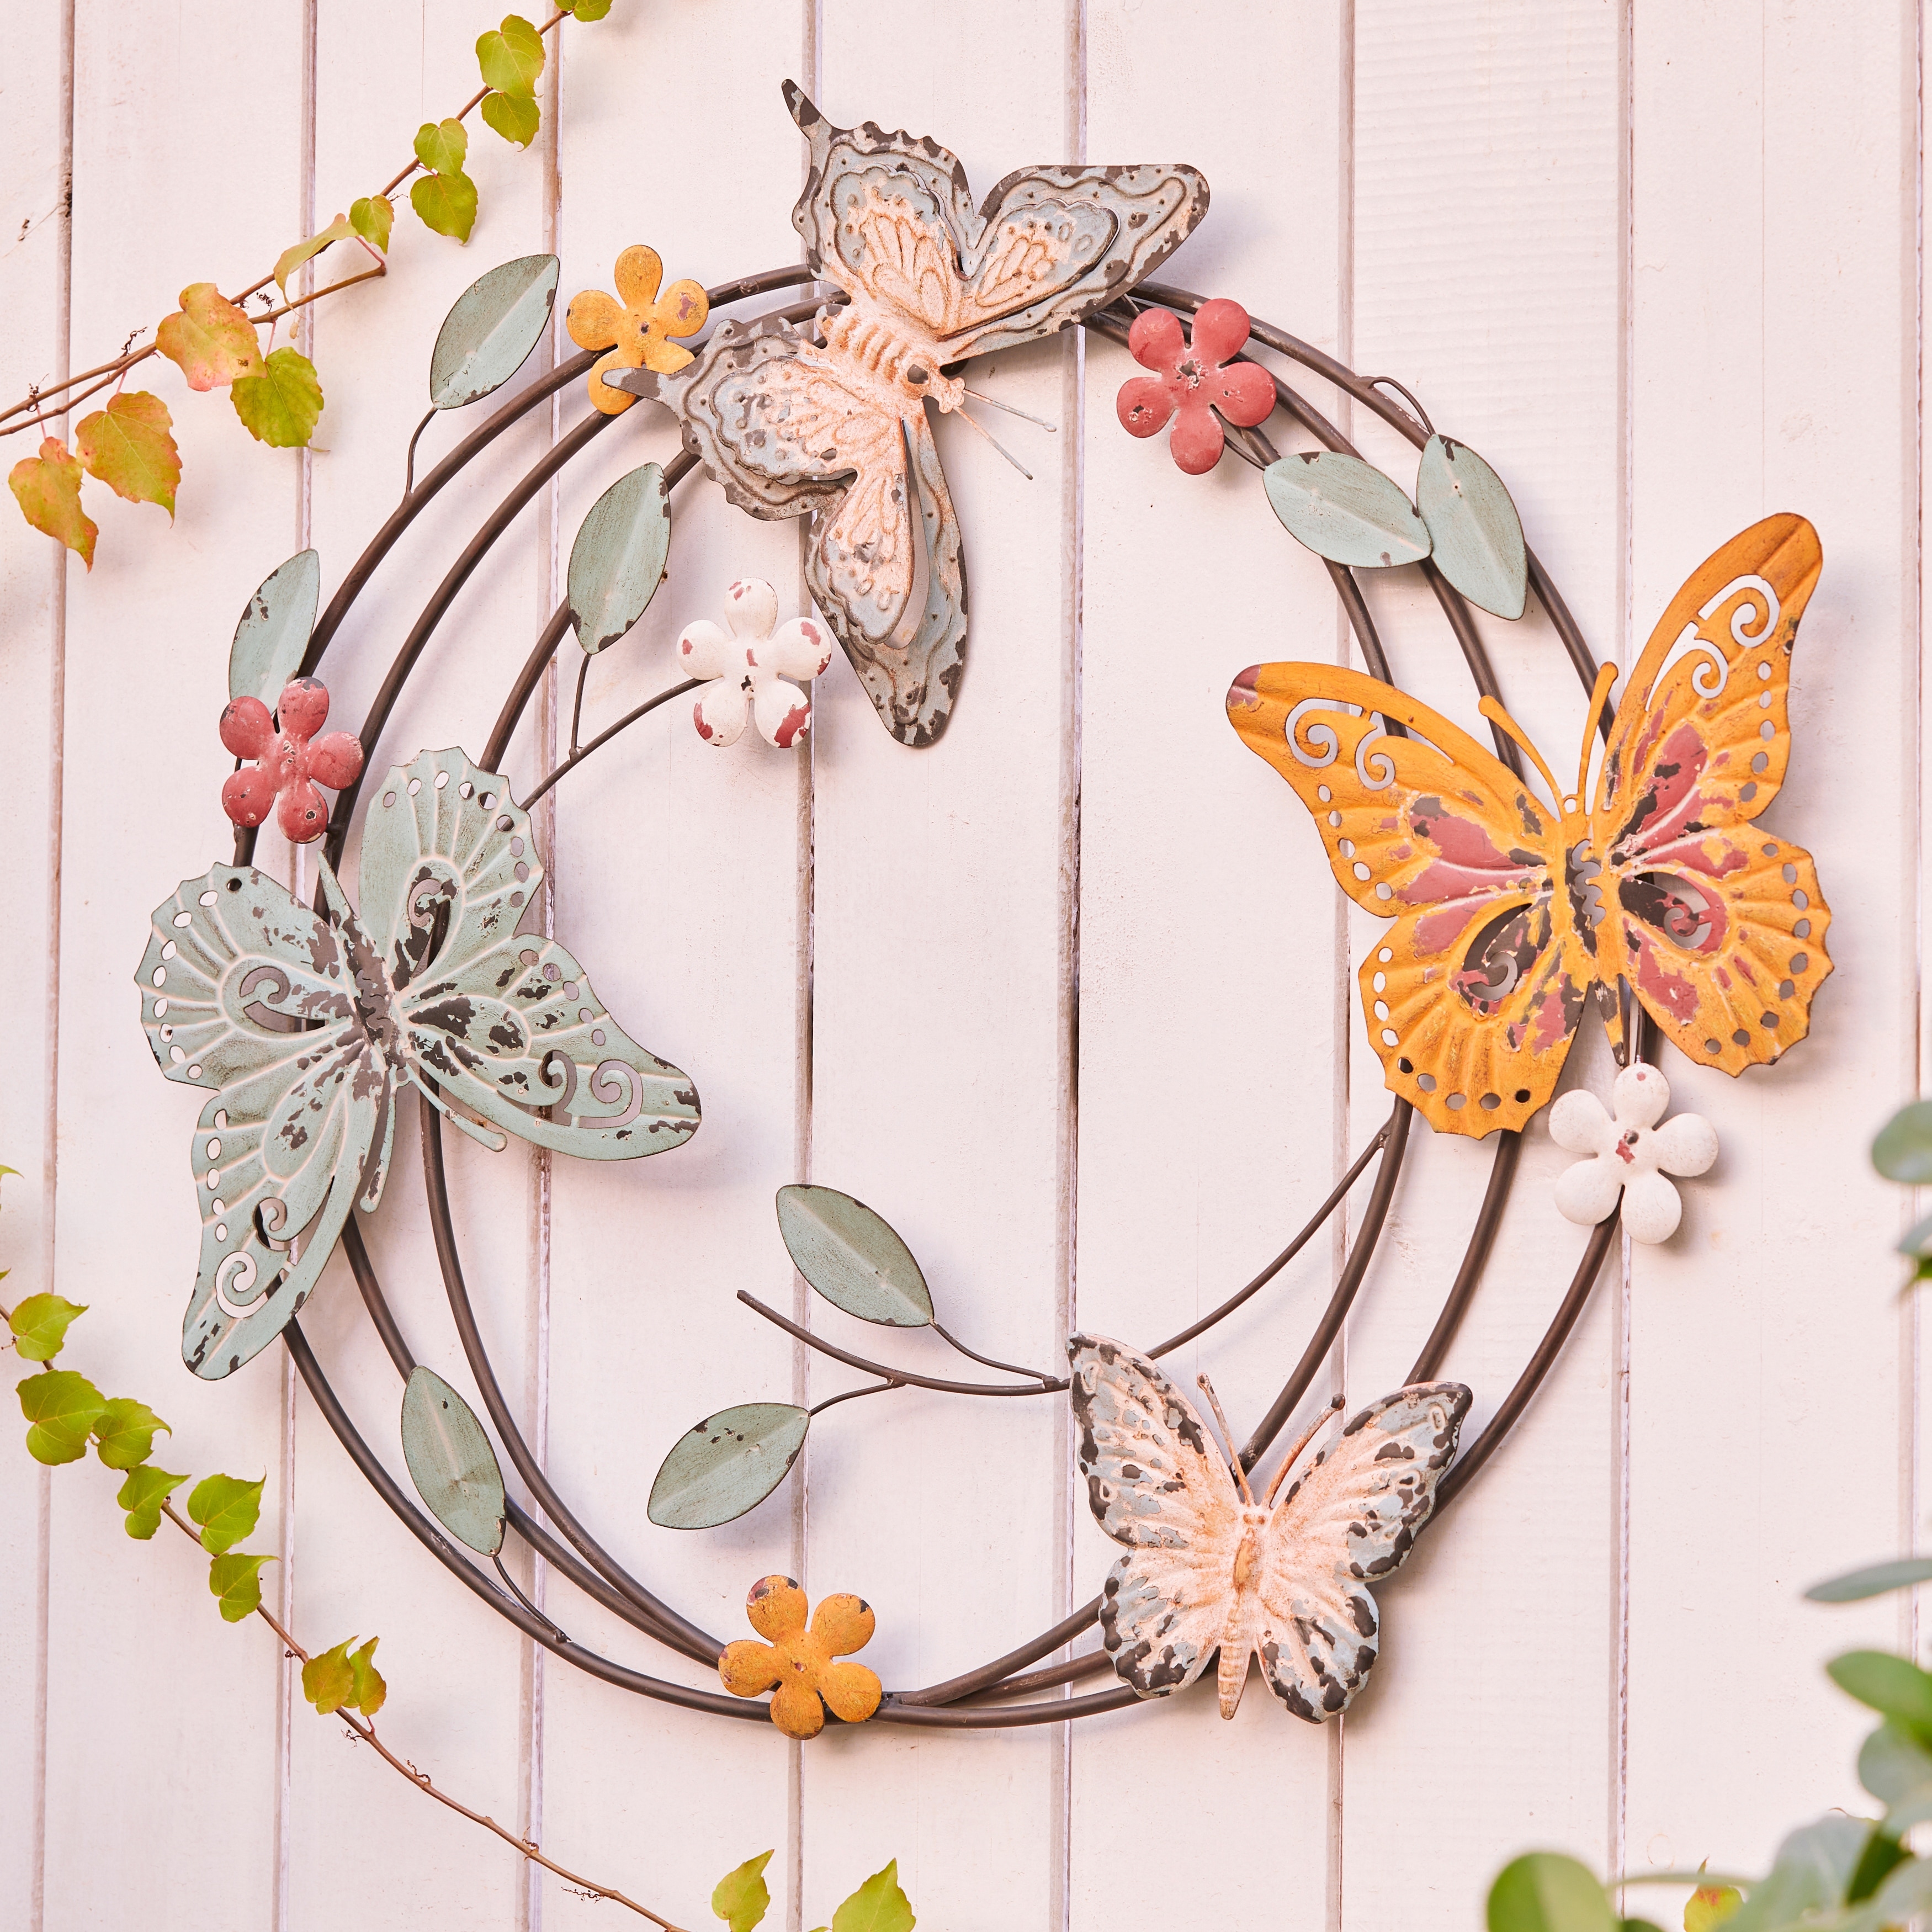 https://ak1.ostkcdn.com/images/products/is/images/direct/d51f248767cc782c18852148af01001b775ab21d/Metal-Butterflies-Round-Indoor-Outdoor-Wall-Decor.jpg